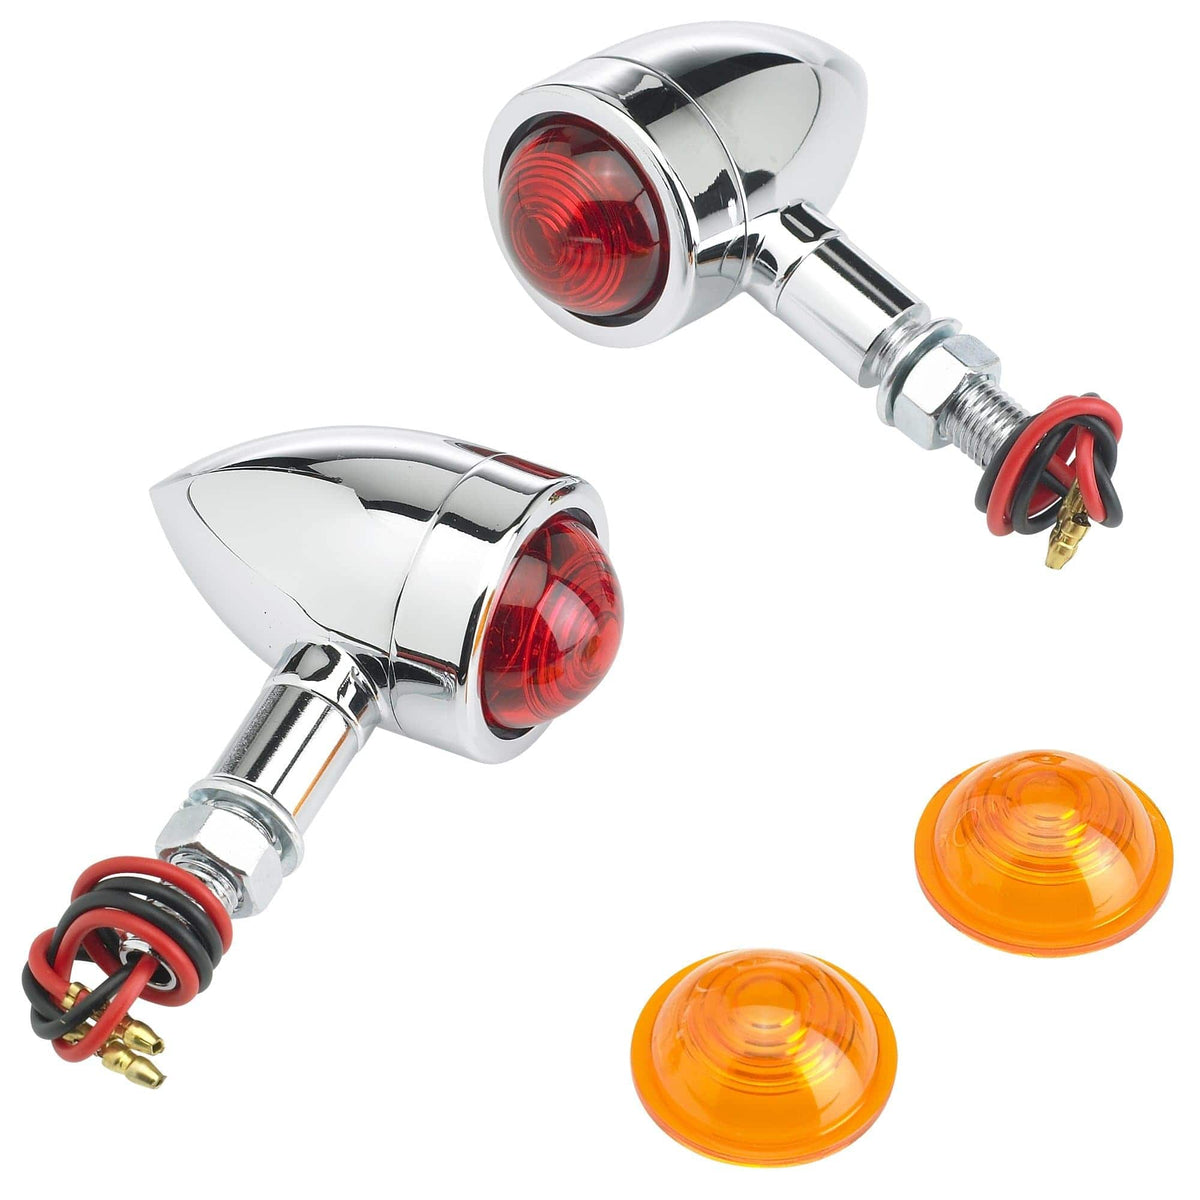 CICMOD Universal Chrome Motorcycle AMBER Bullet Tail Turn Signal